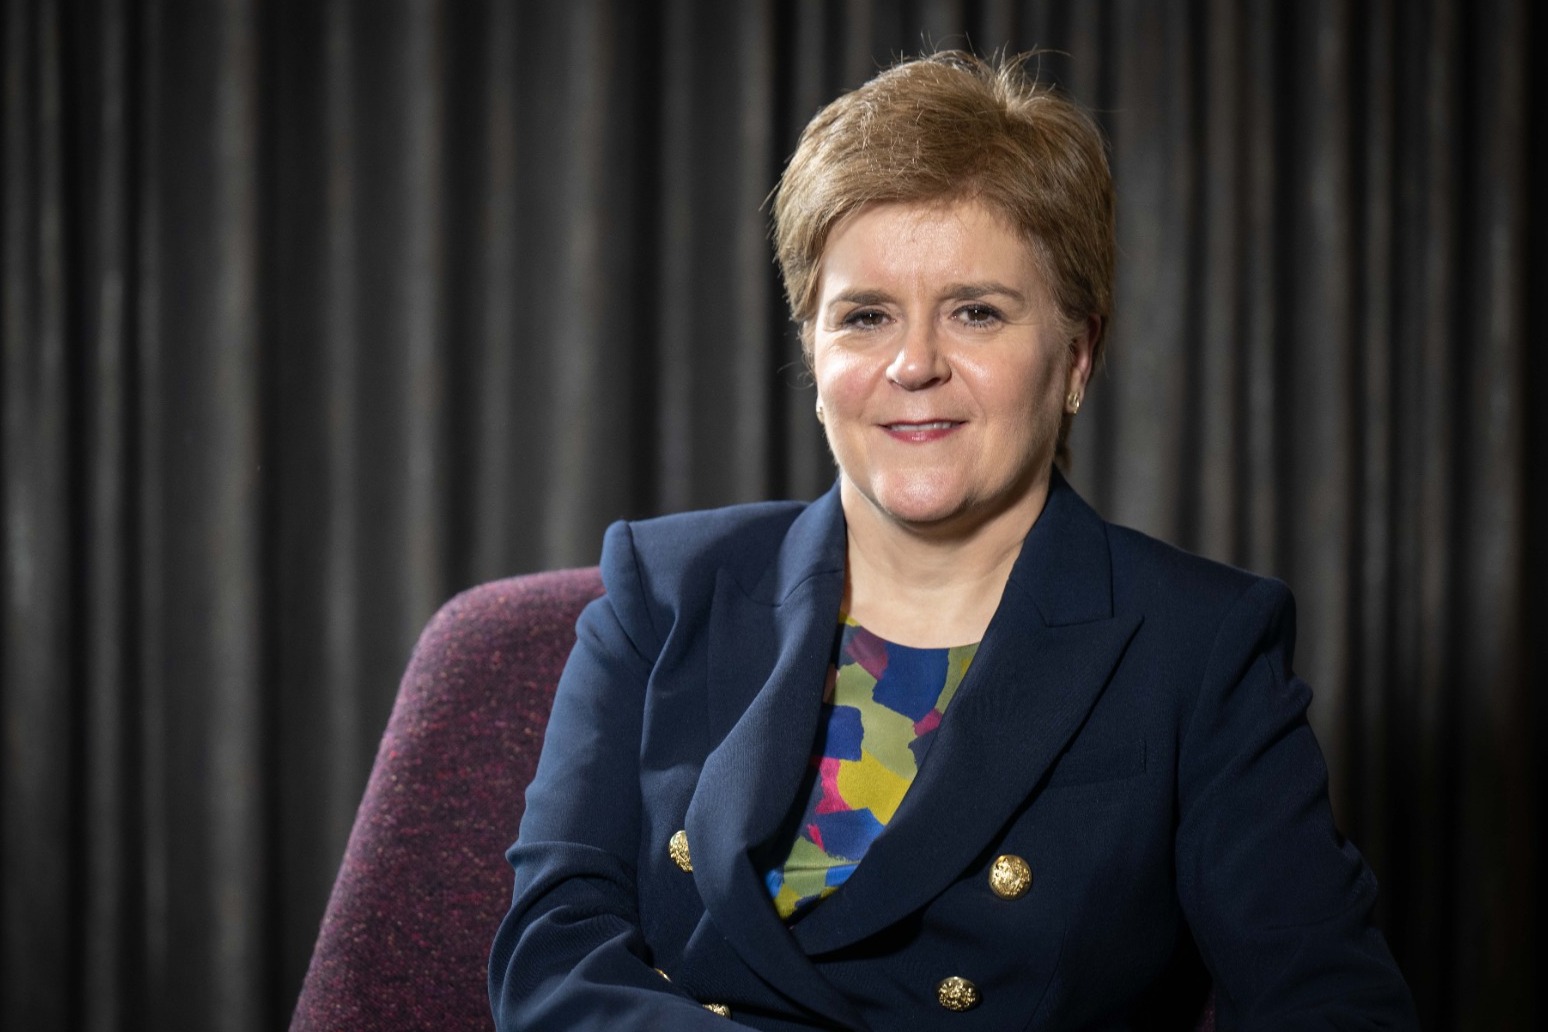 Nicola Sturgeon says setting timetable on continued use of sterling would be irresponsible 